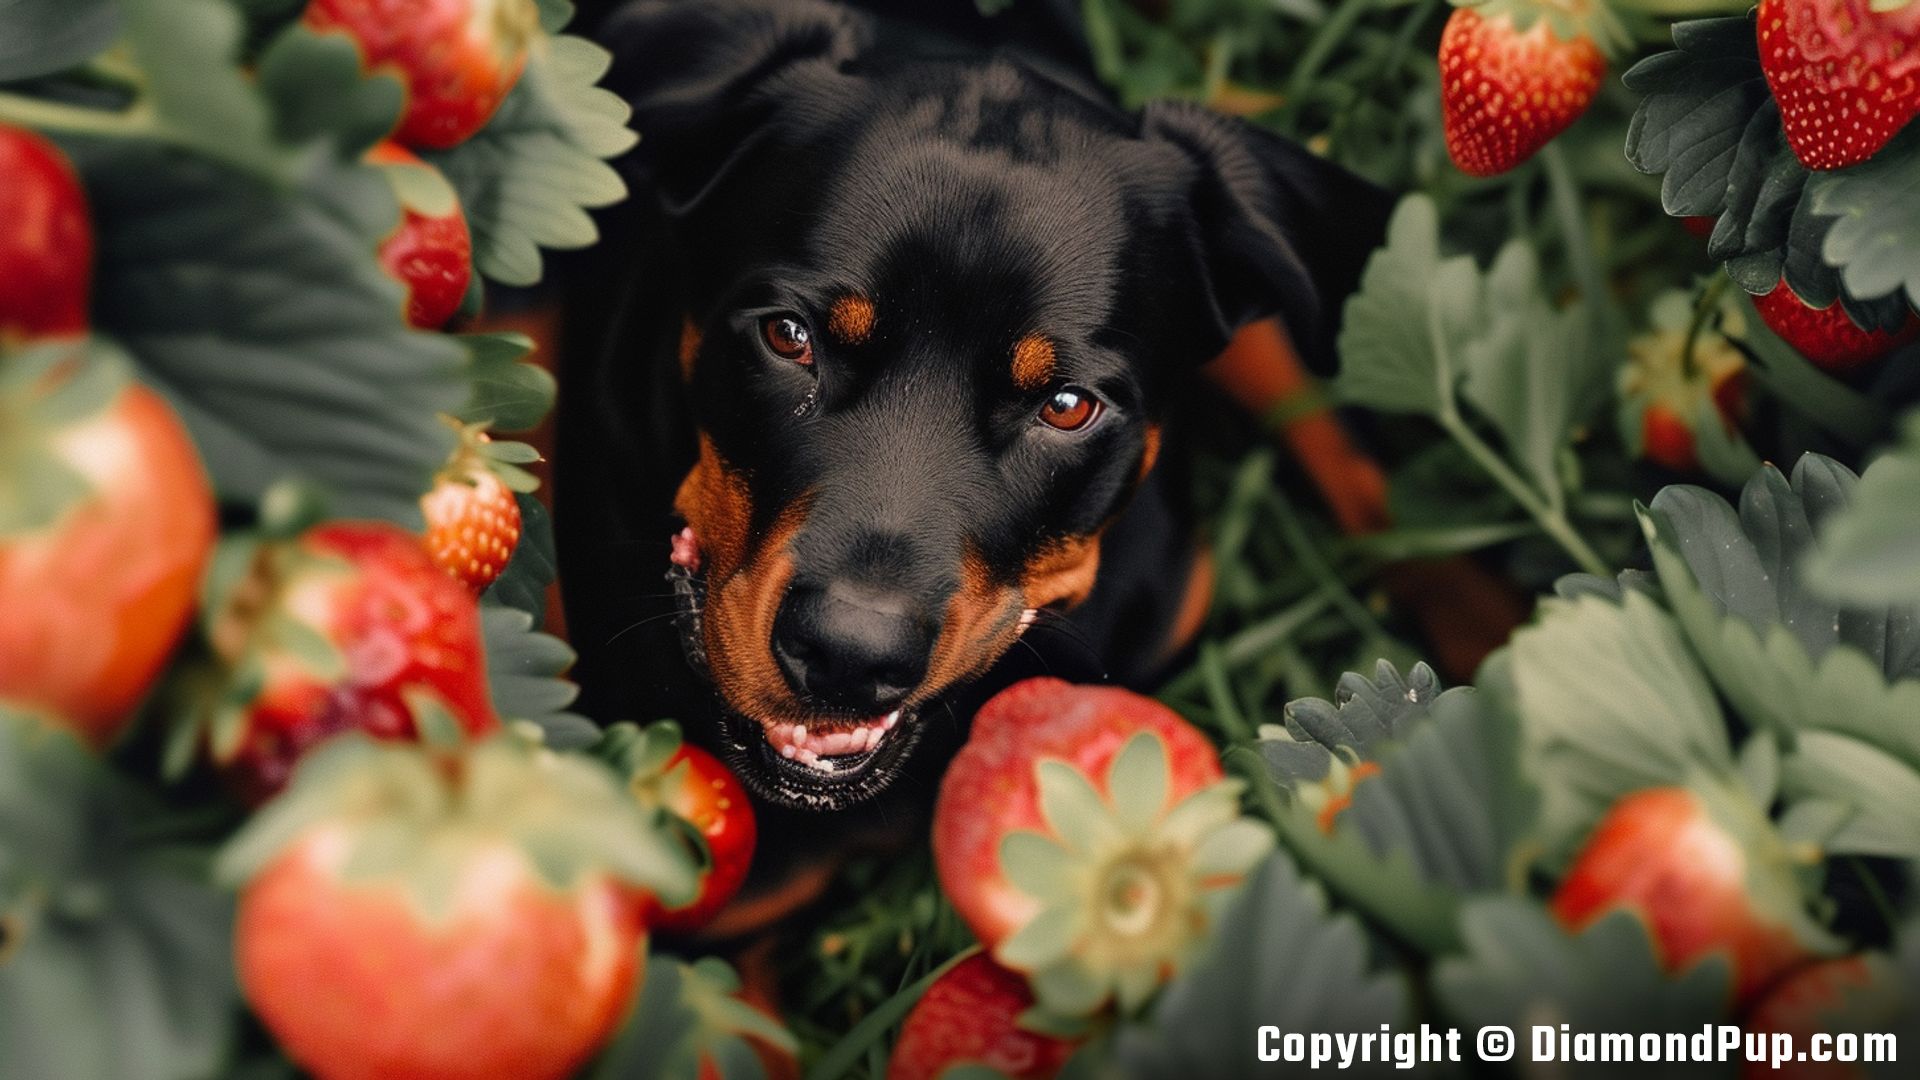 Photo of a Playful Rottweiler Snacking on Strawberries